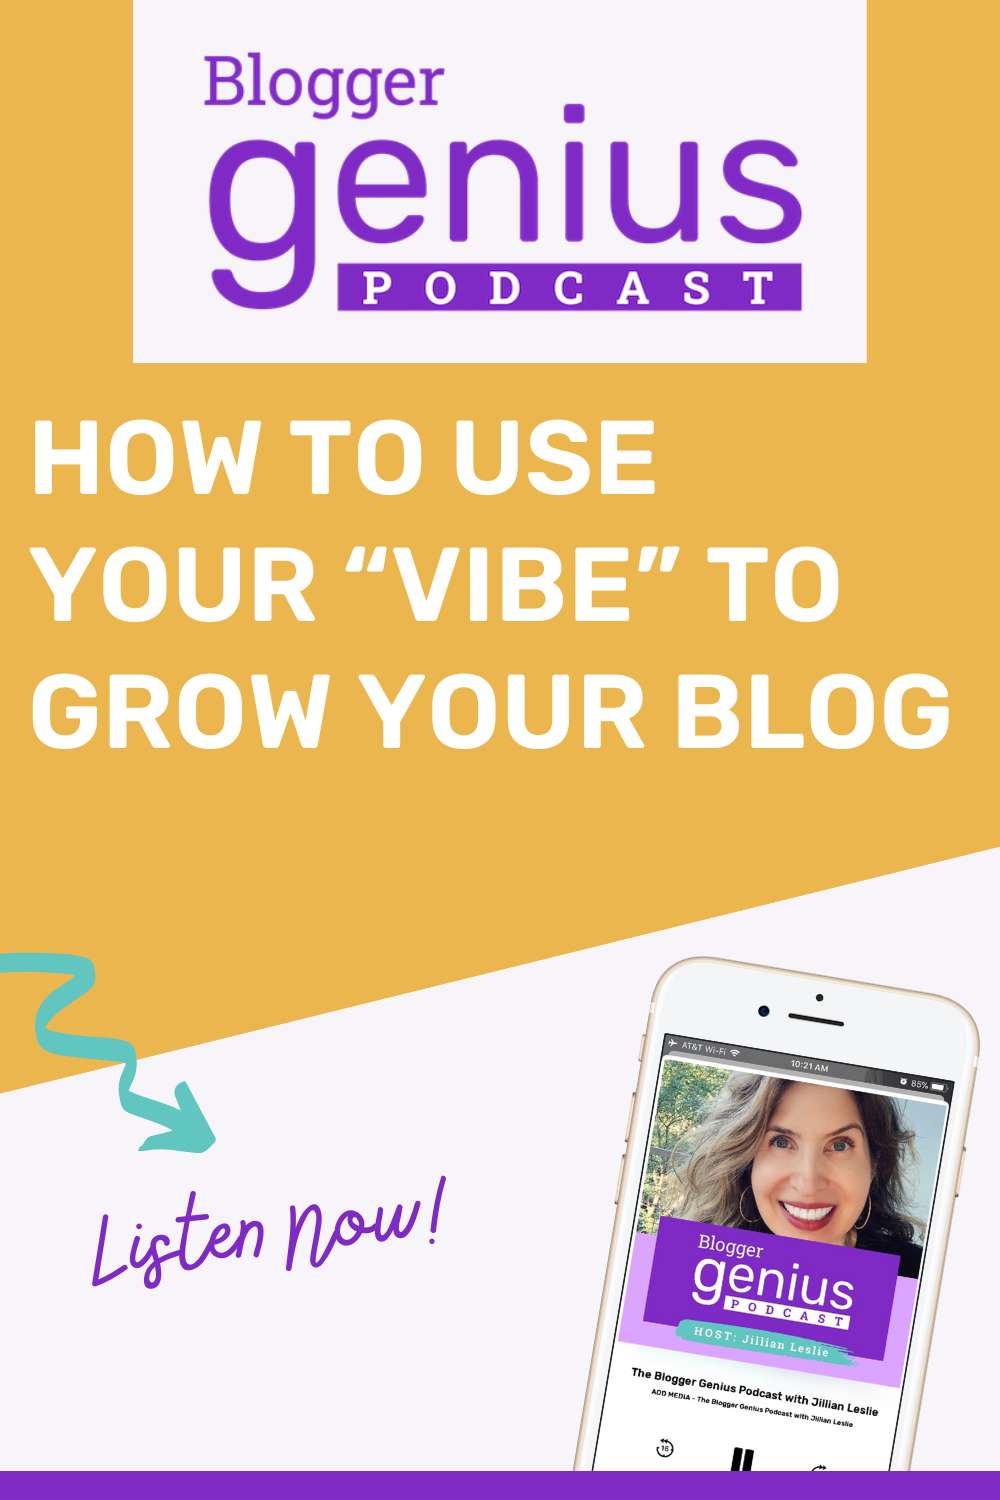 Capitalize on Your "Vibe," Use It To Grow Your Blog | The Blogger Genius Podcast with Jillian Leslie